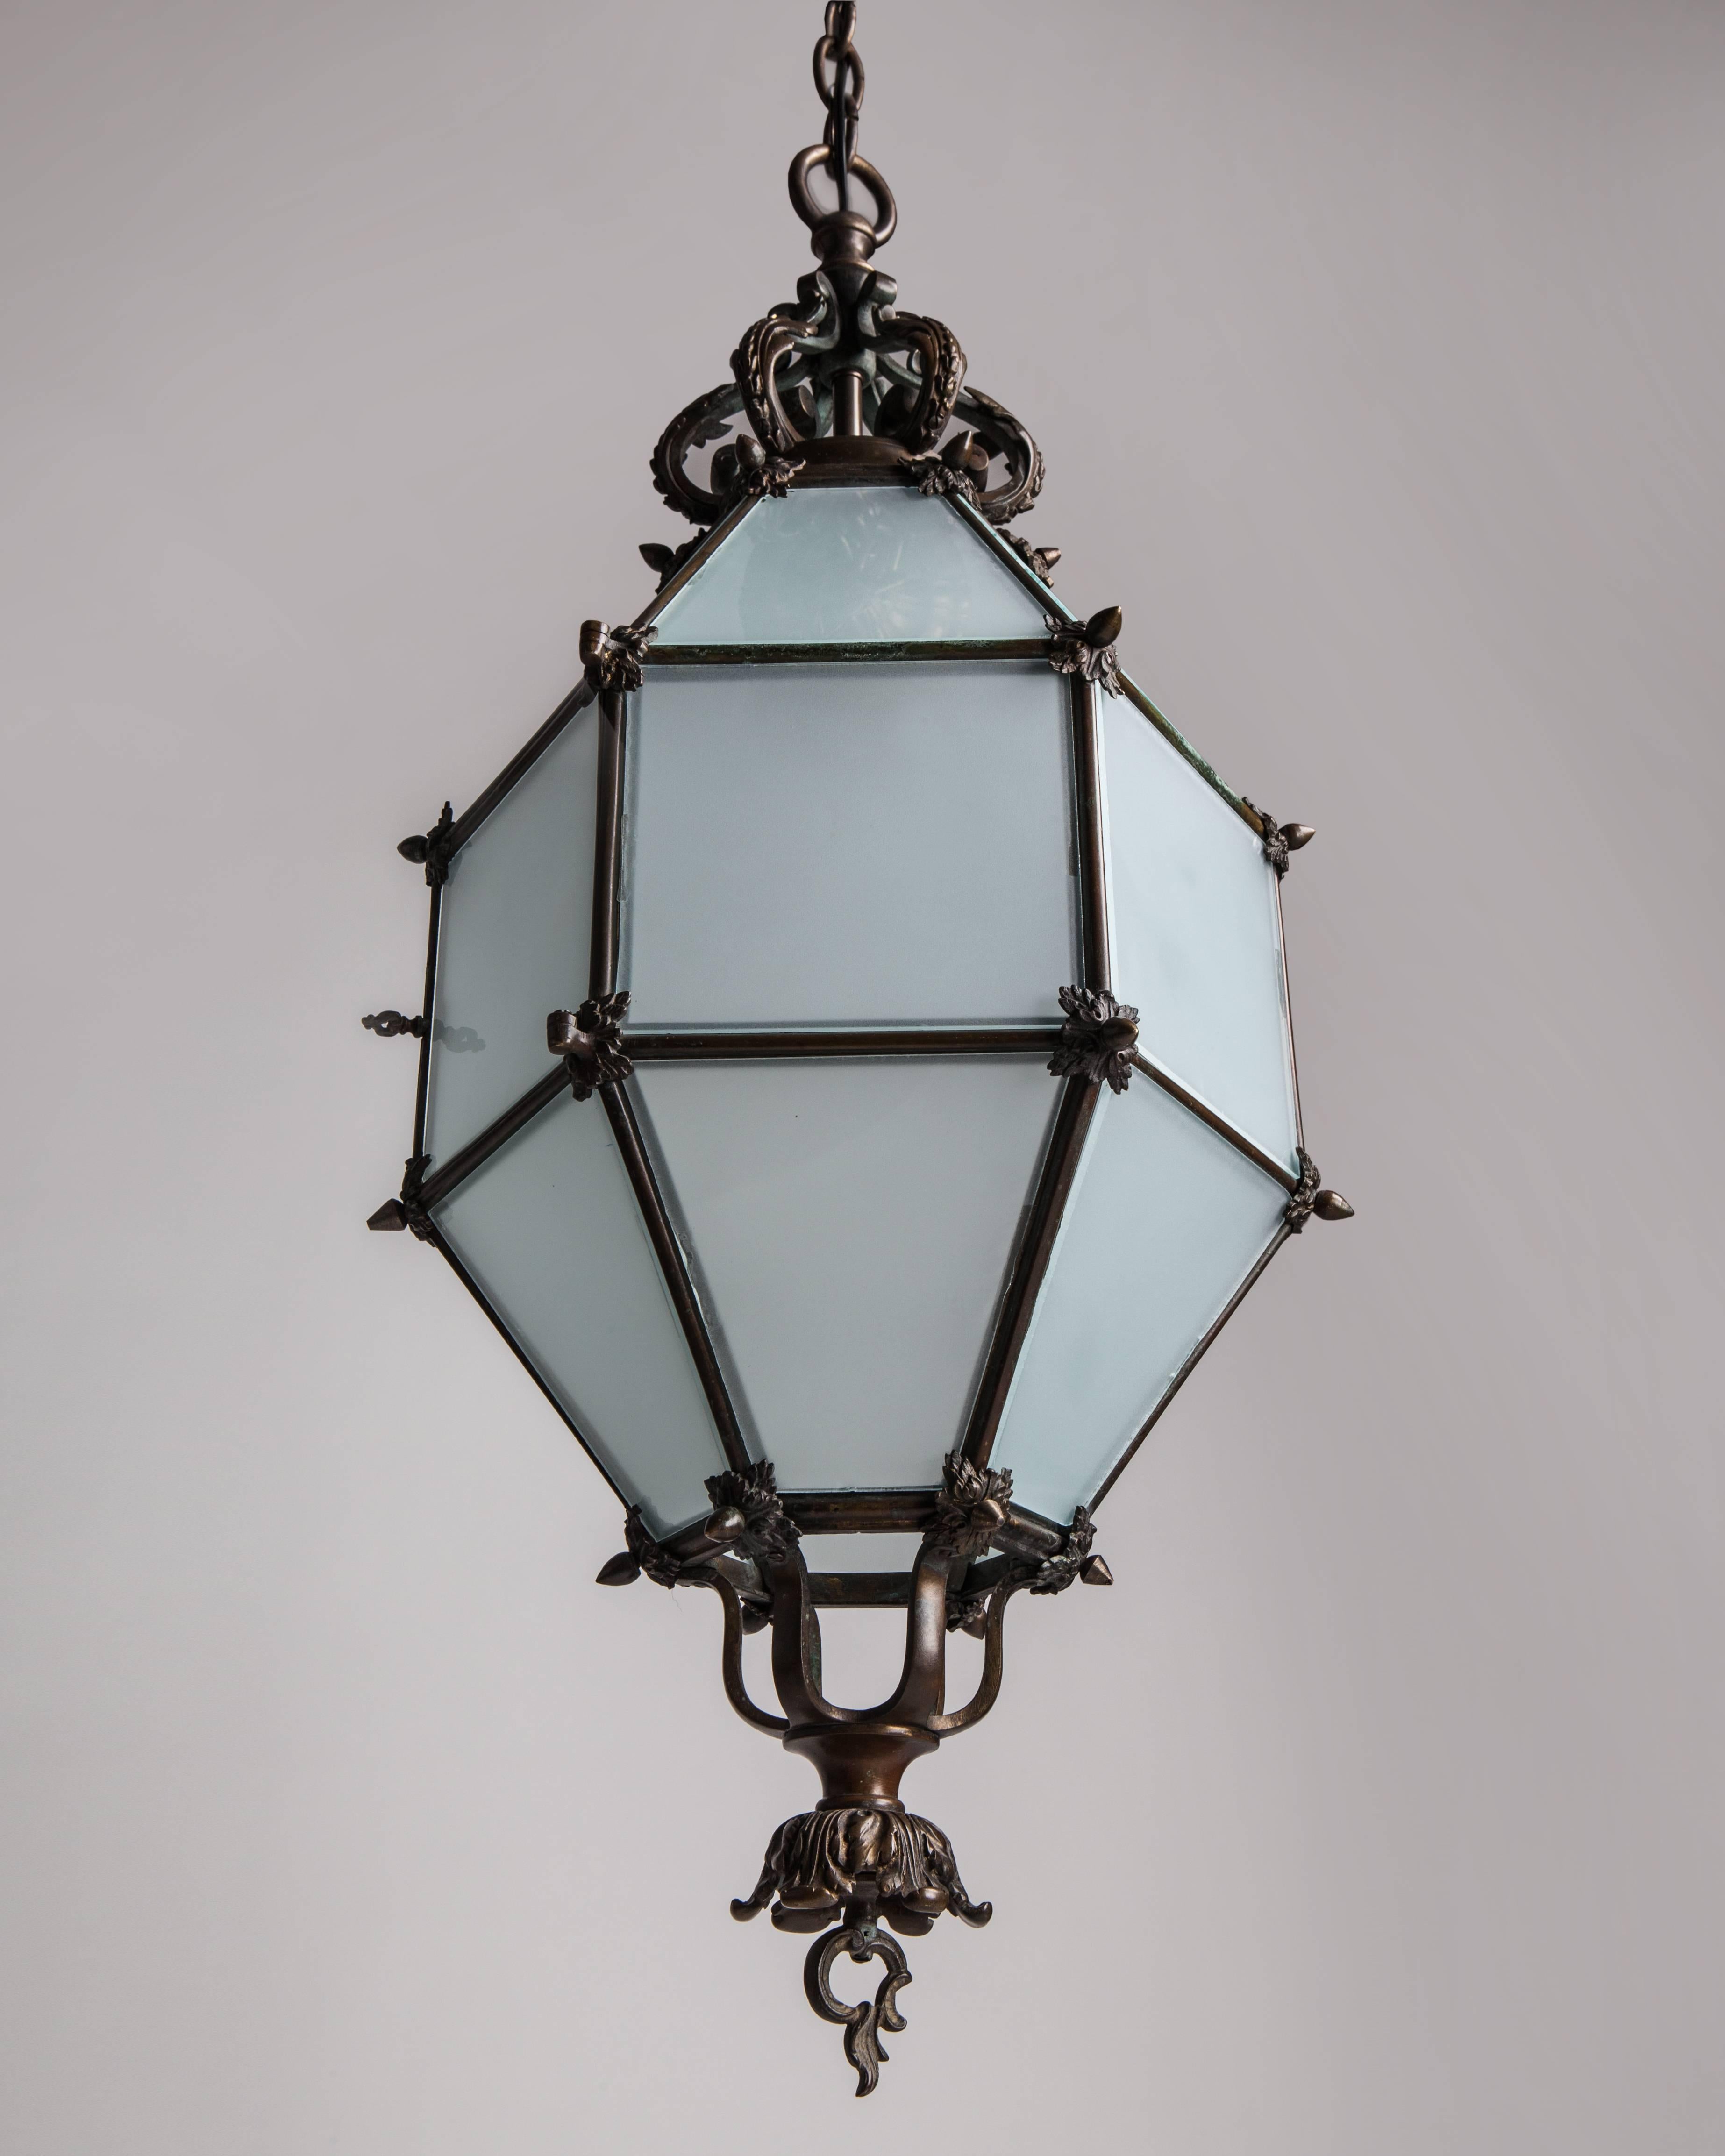 AHL3965.
An antique bronze lantern with 18 facets in its original age-darkened patina. Glazed with frosted glass panels, each secured on the corners with cast foliate pieces. Relamps through a discrete hinged door.

Dimensions:
Current height